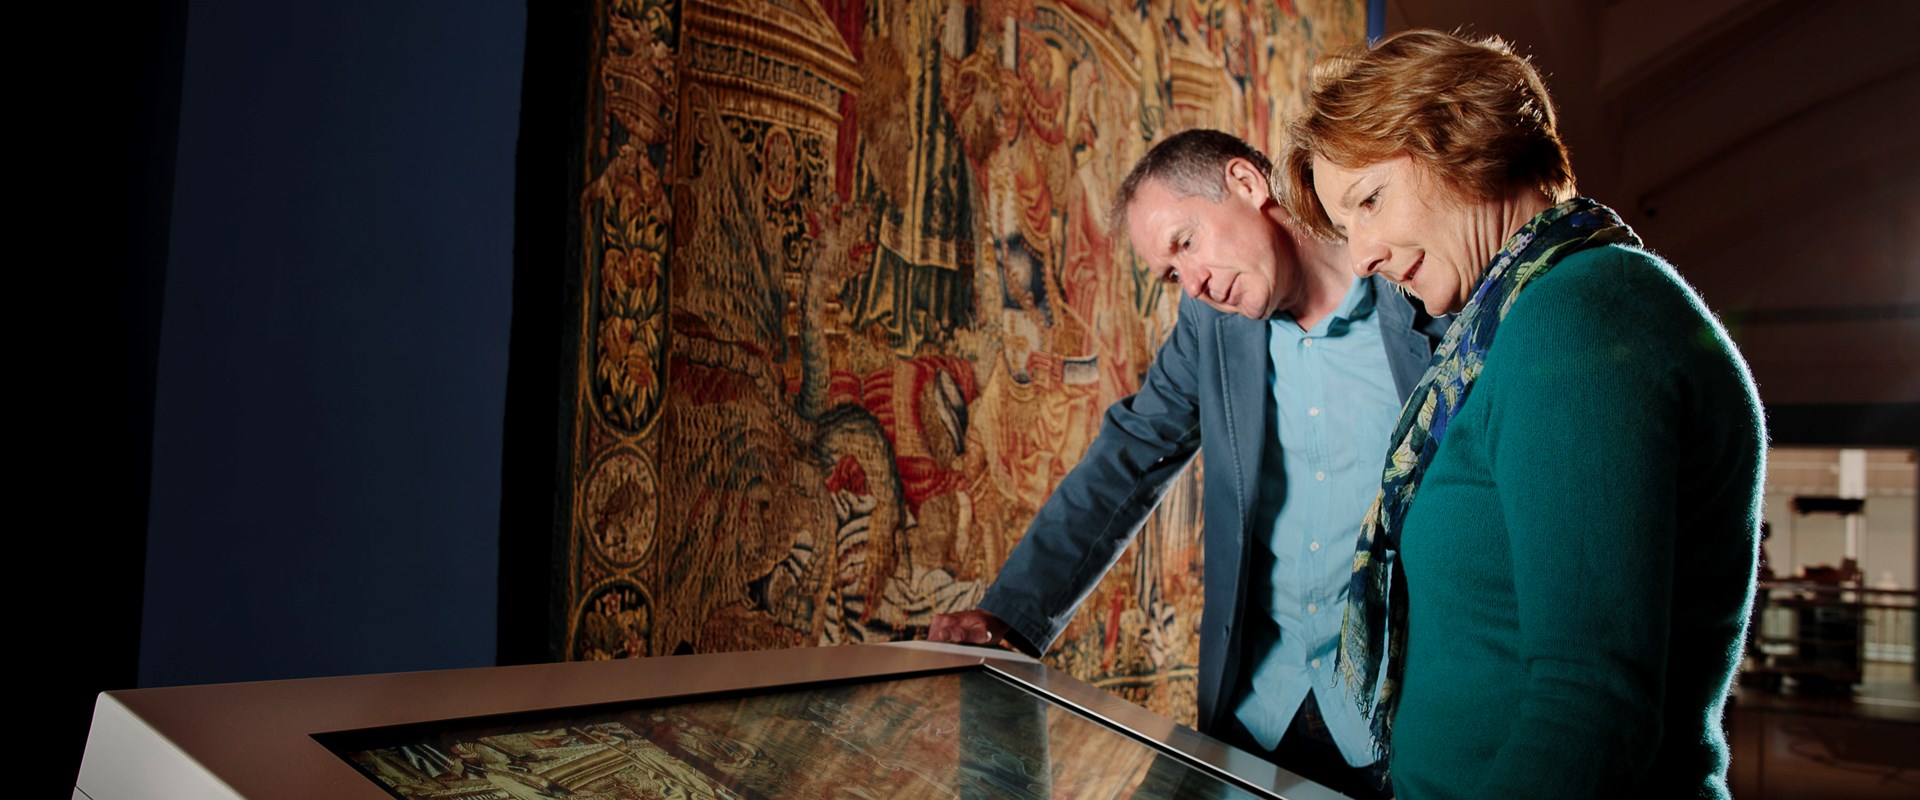 Two visitors looking at an interactive touch screen in front of a large tapestry.